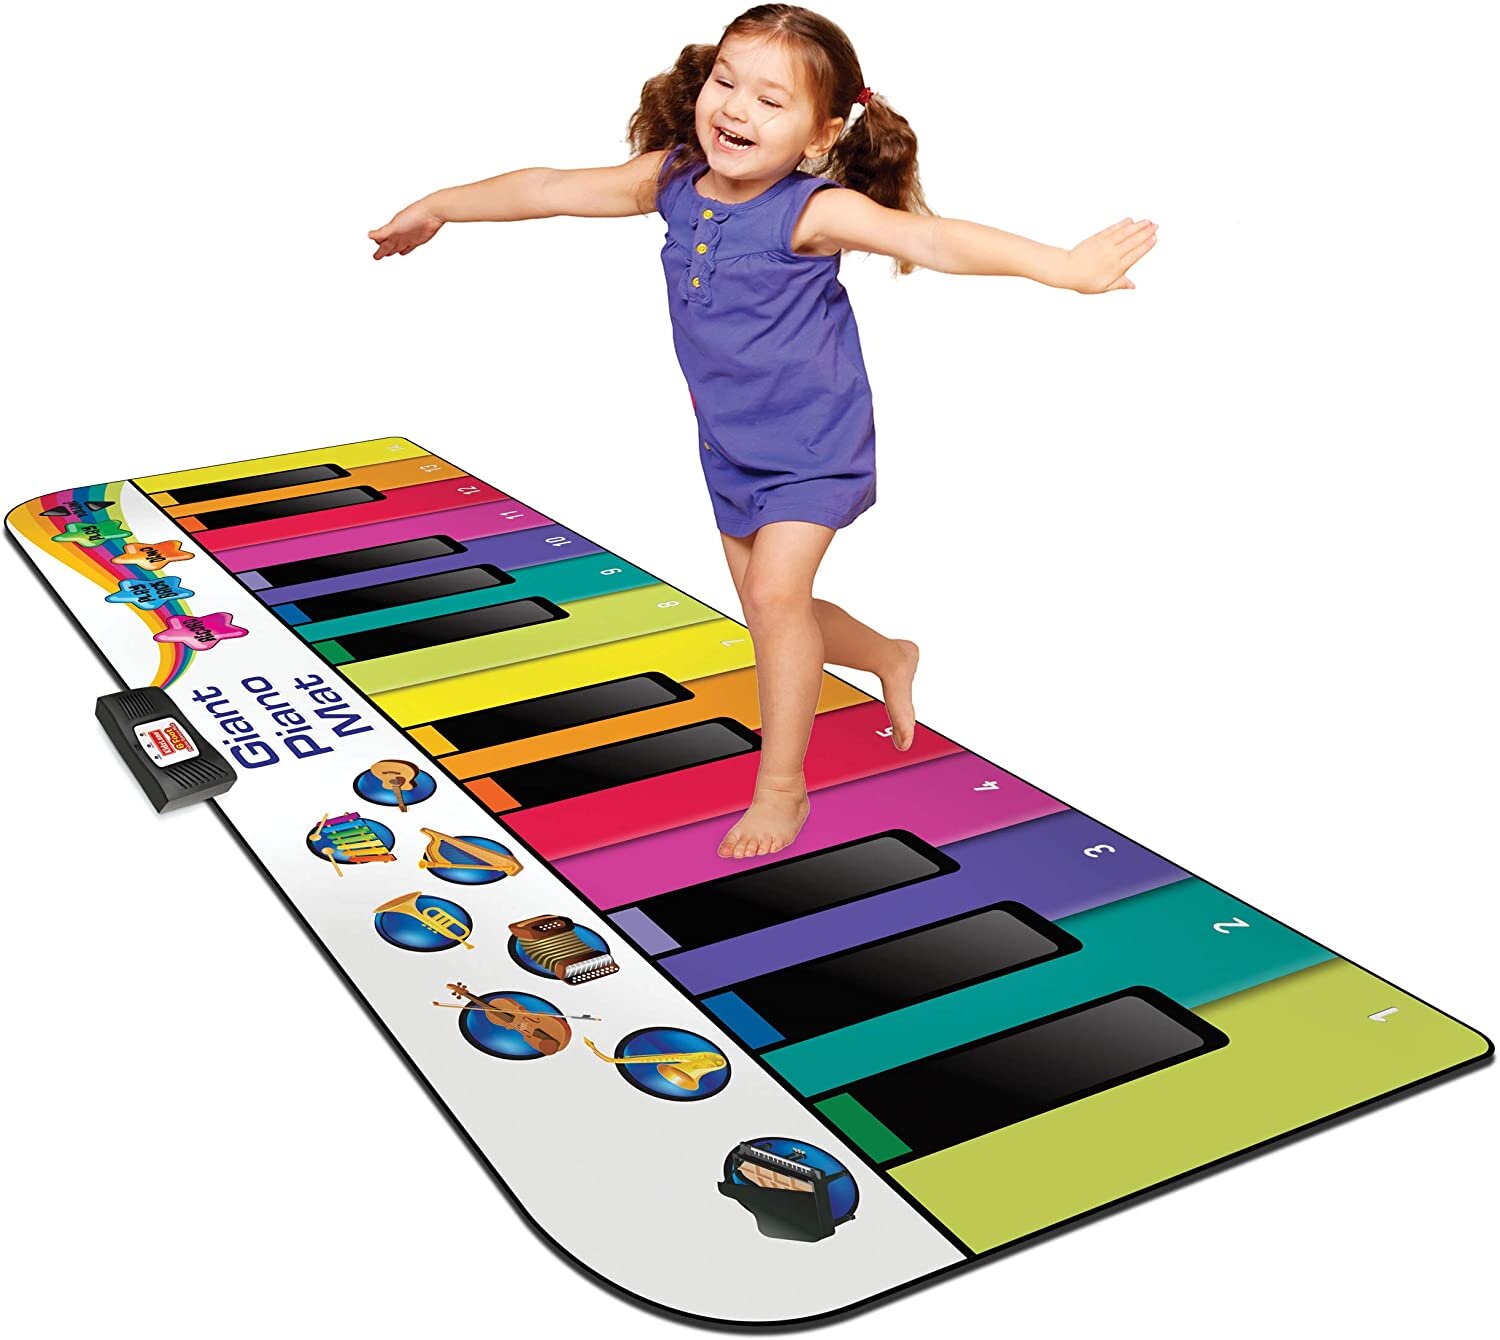 Lierpit Music Piano mat Keyboard for Kids Early Childhood Education Floor Playing Birthday Suitable for 3 4 5 6 7-Year-Old Infant Boys and Girls 